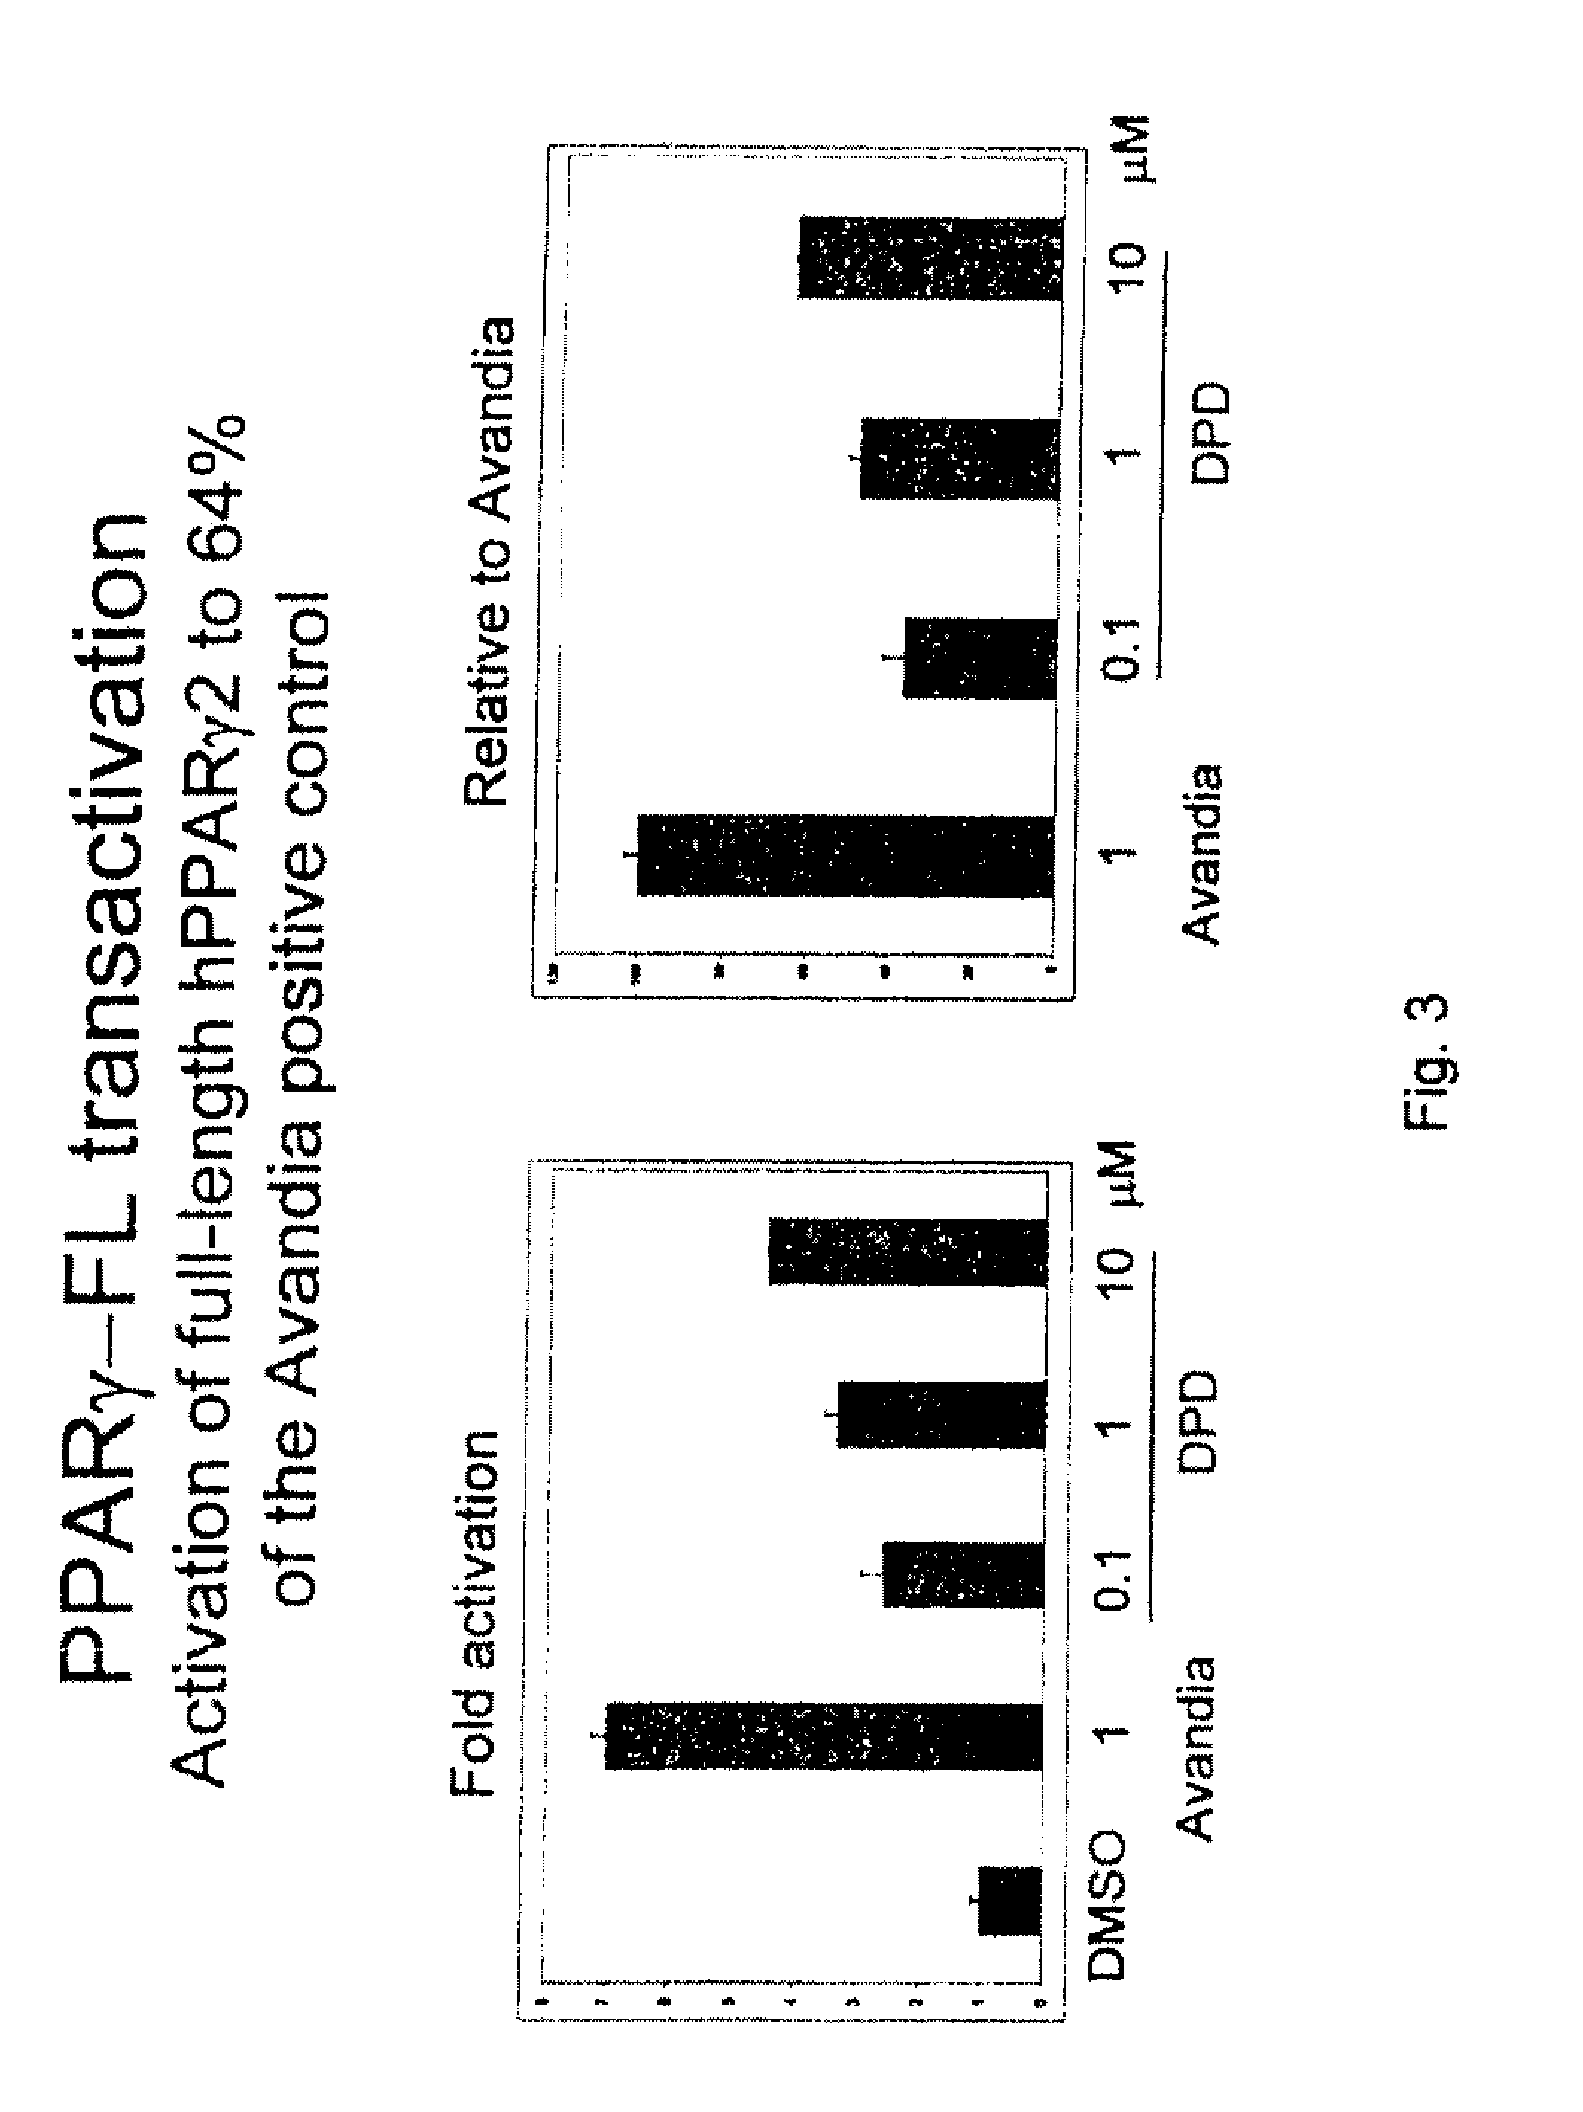 Substituted 1,3-dioxanes useful as PPAR modulators